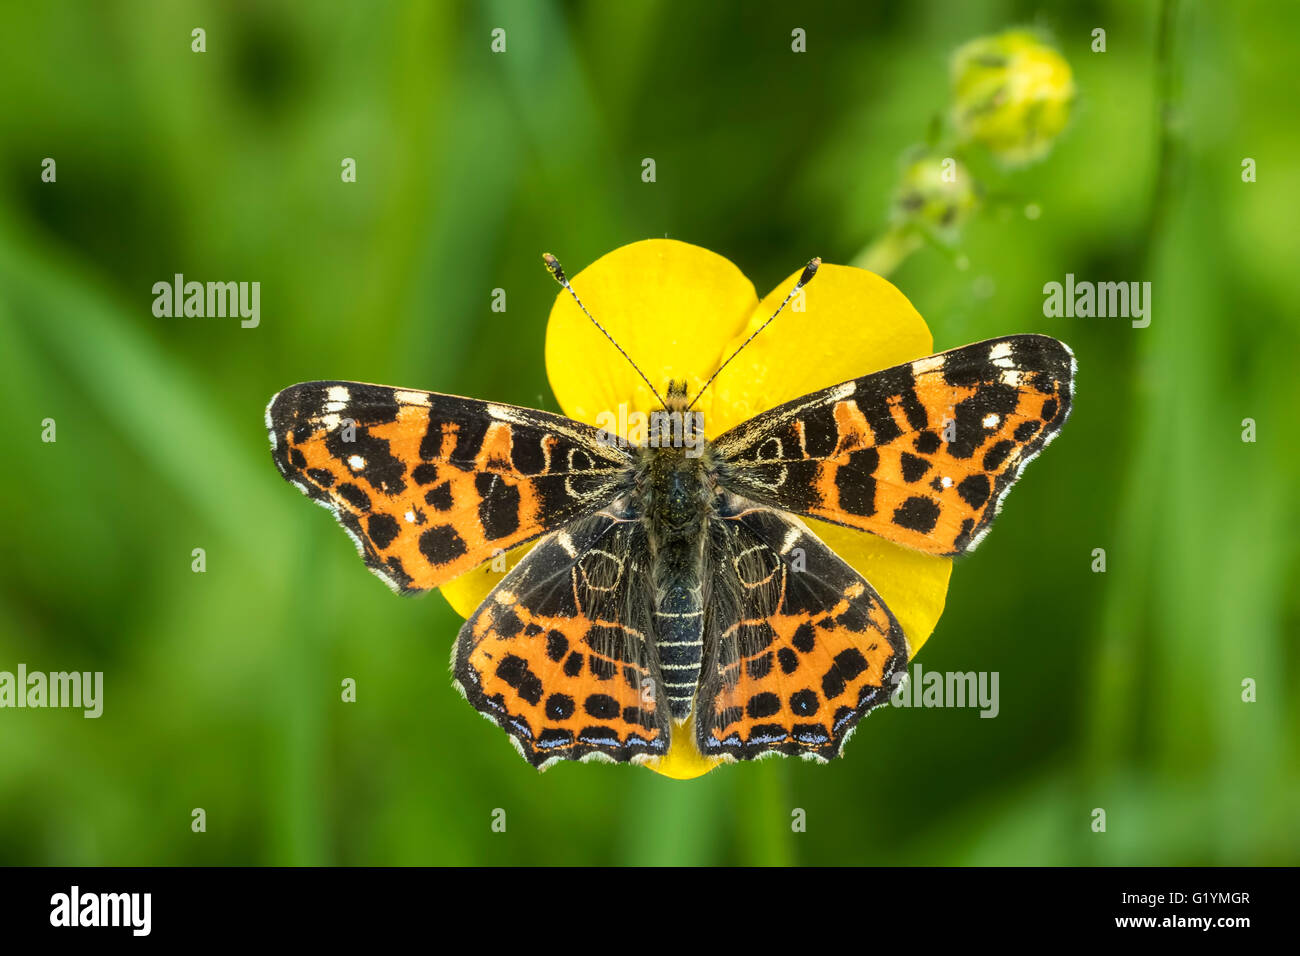 Top view of a map butterfly (Araschnia levana) resting on a yellow buttercup flower. This butterfly is a Spring season generatio Stock Photo